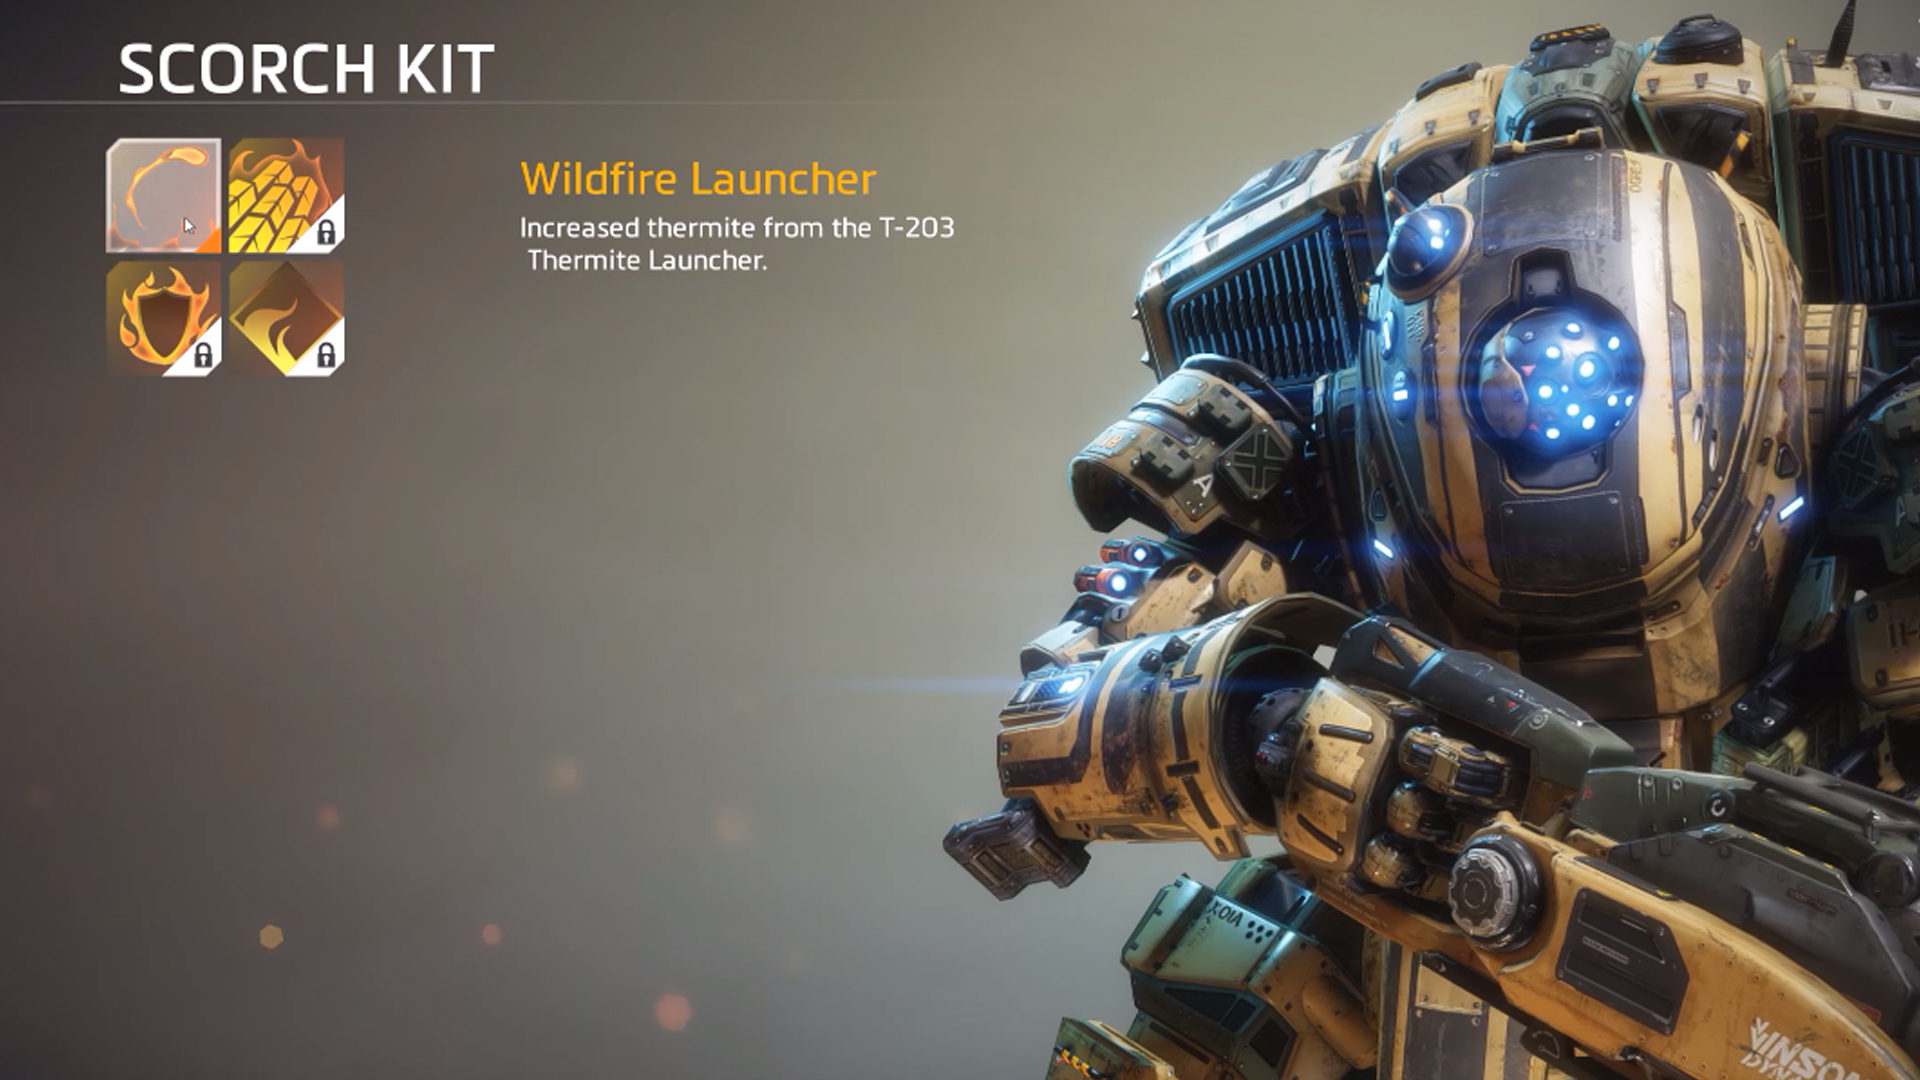 Scorch Kit - Wildfire Launcher